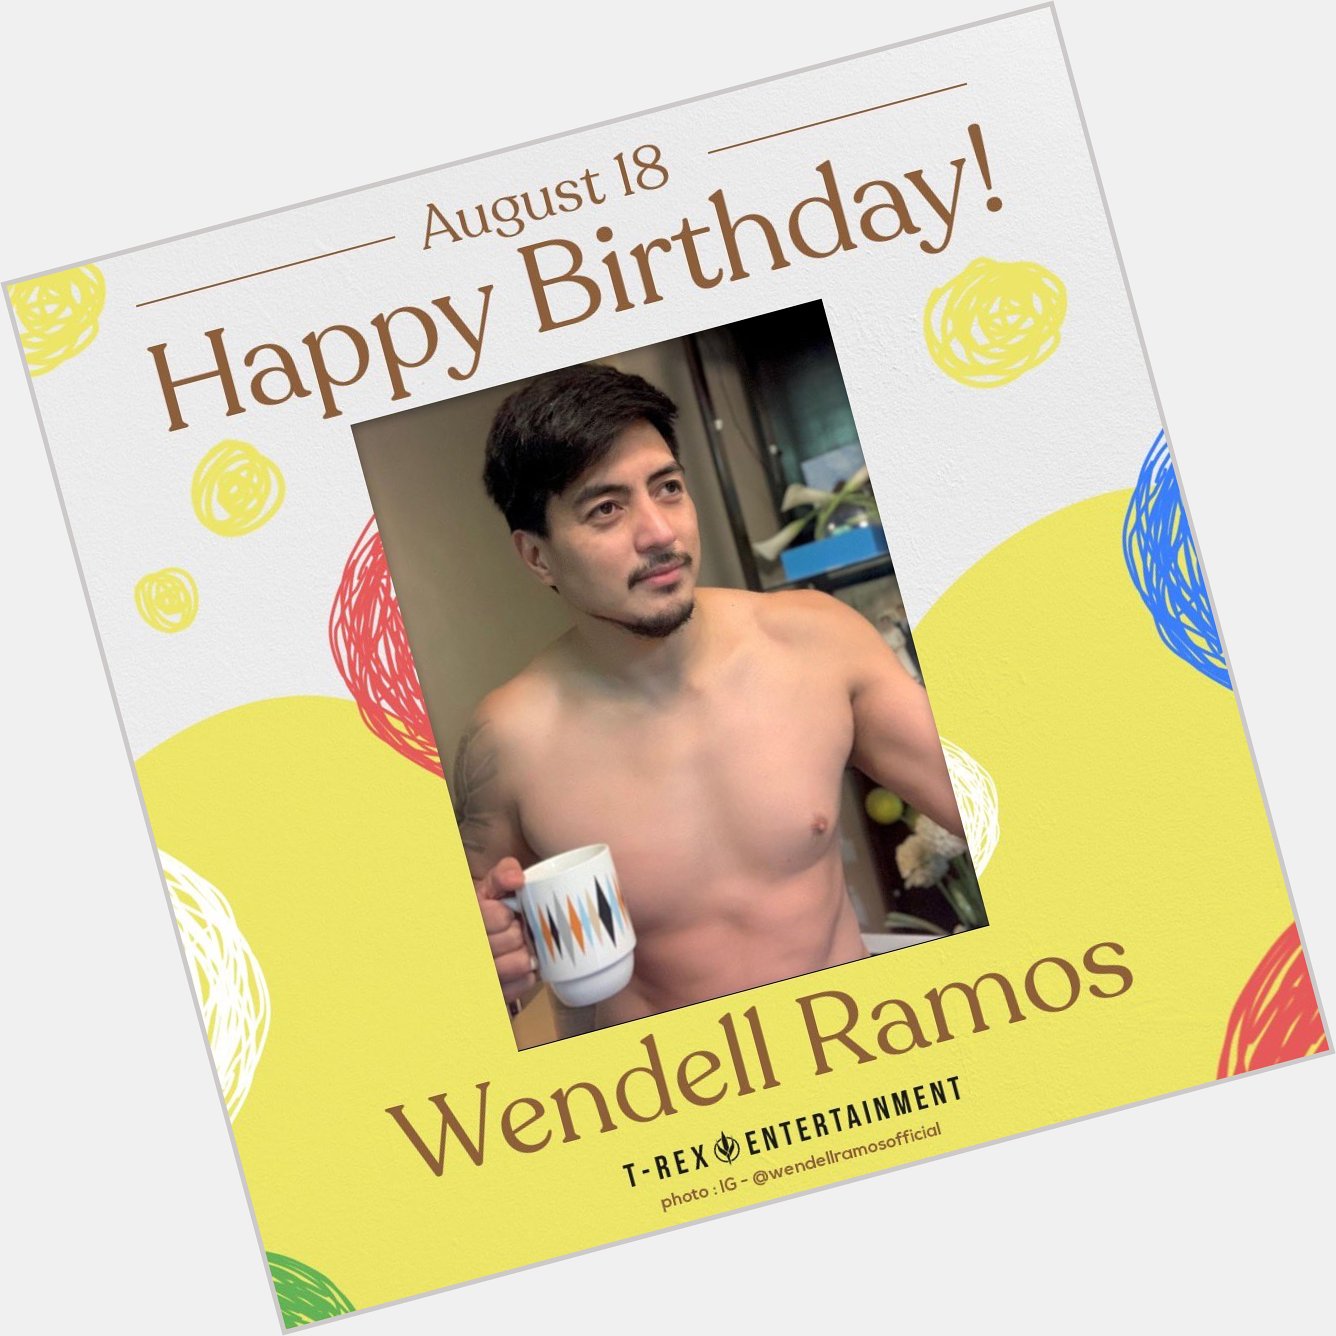 Happy 42nd birthday, Wendell Ramos! 

Keep on sharing positive vibes. 